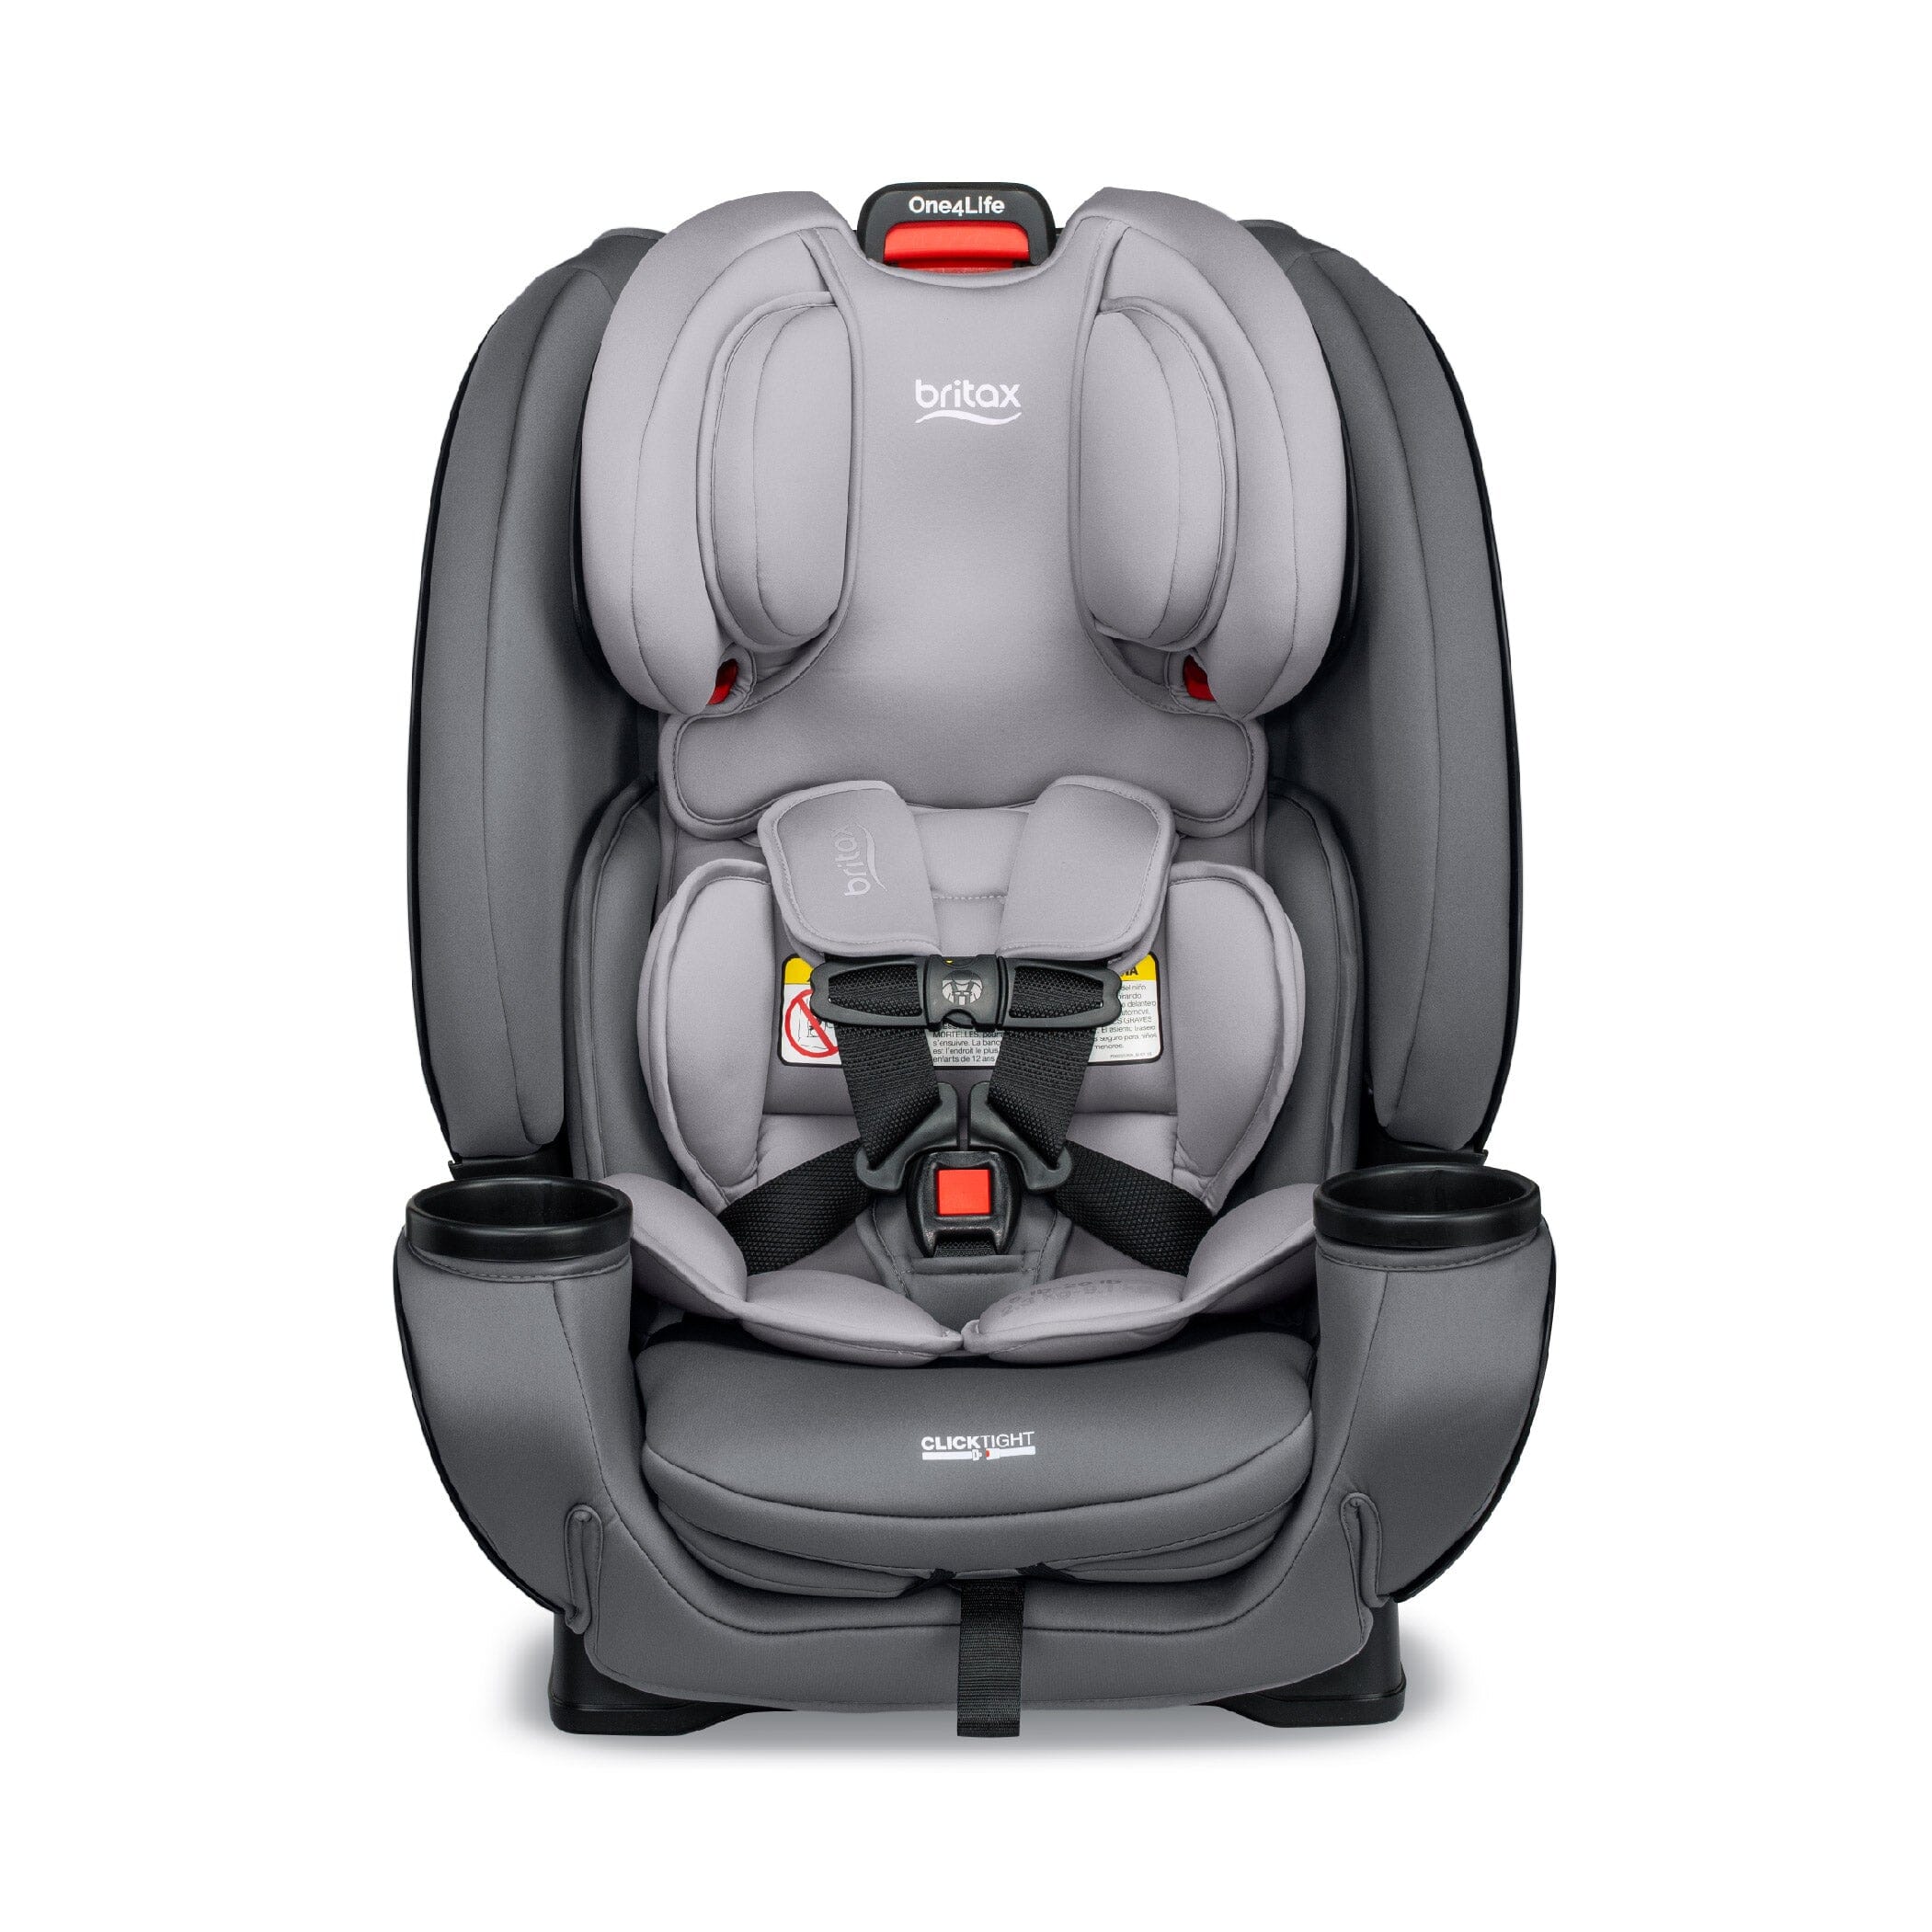 Britax One4Life All-in-One Car Seat Child Seat